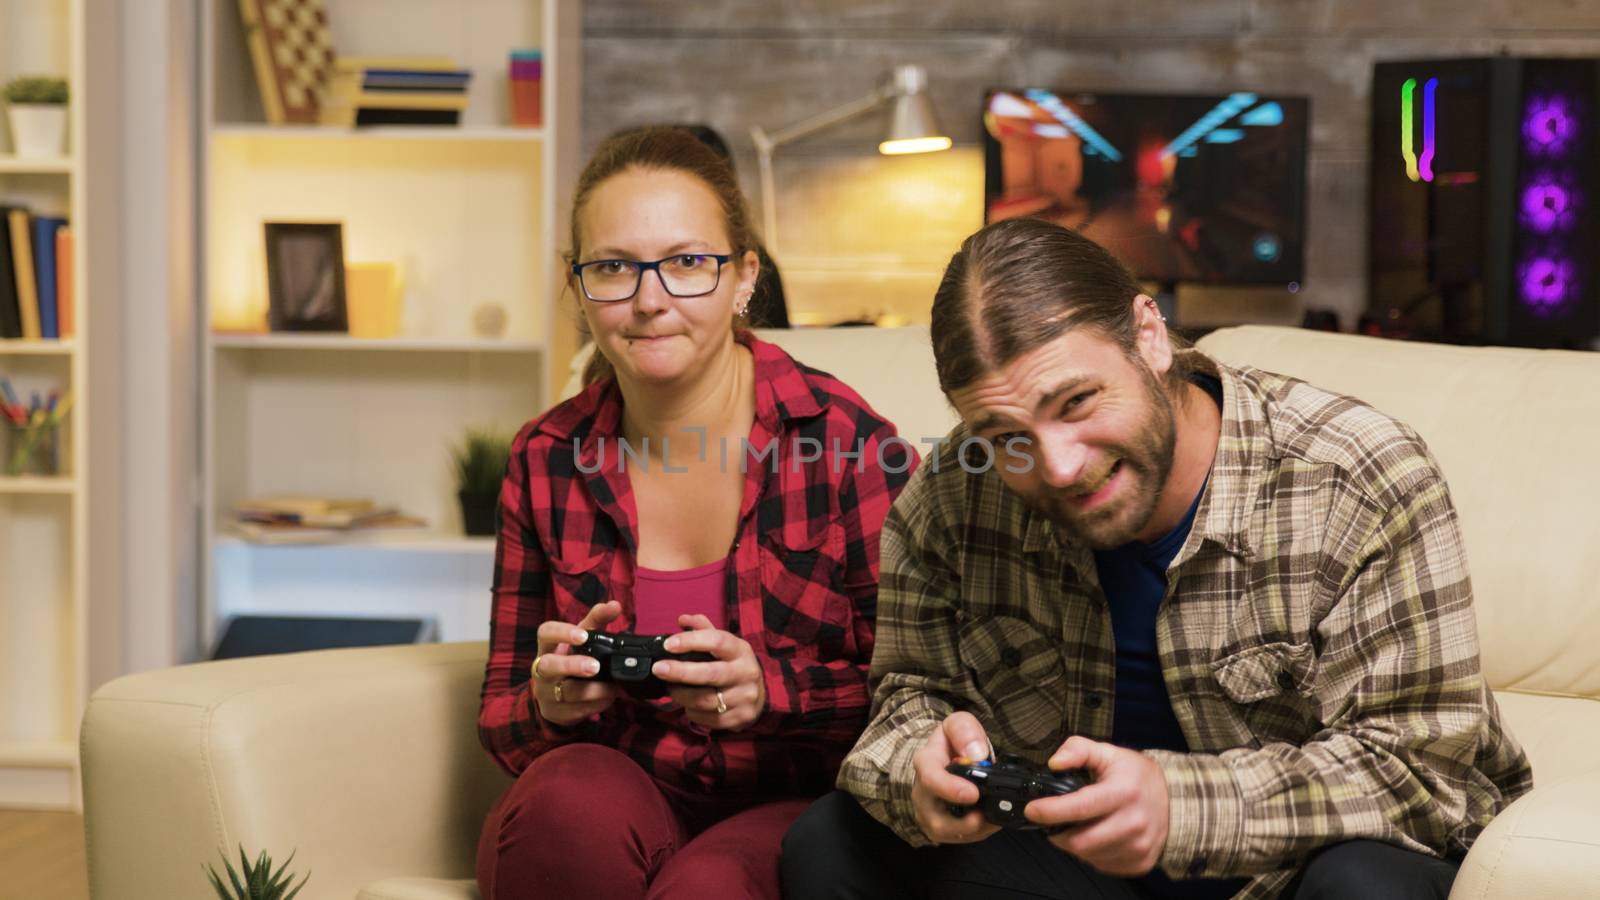 Woman yelling at her boyfriend after losing at video games by DCStudio